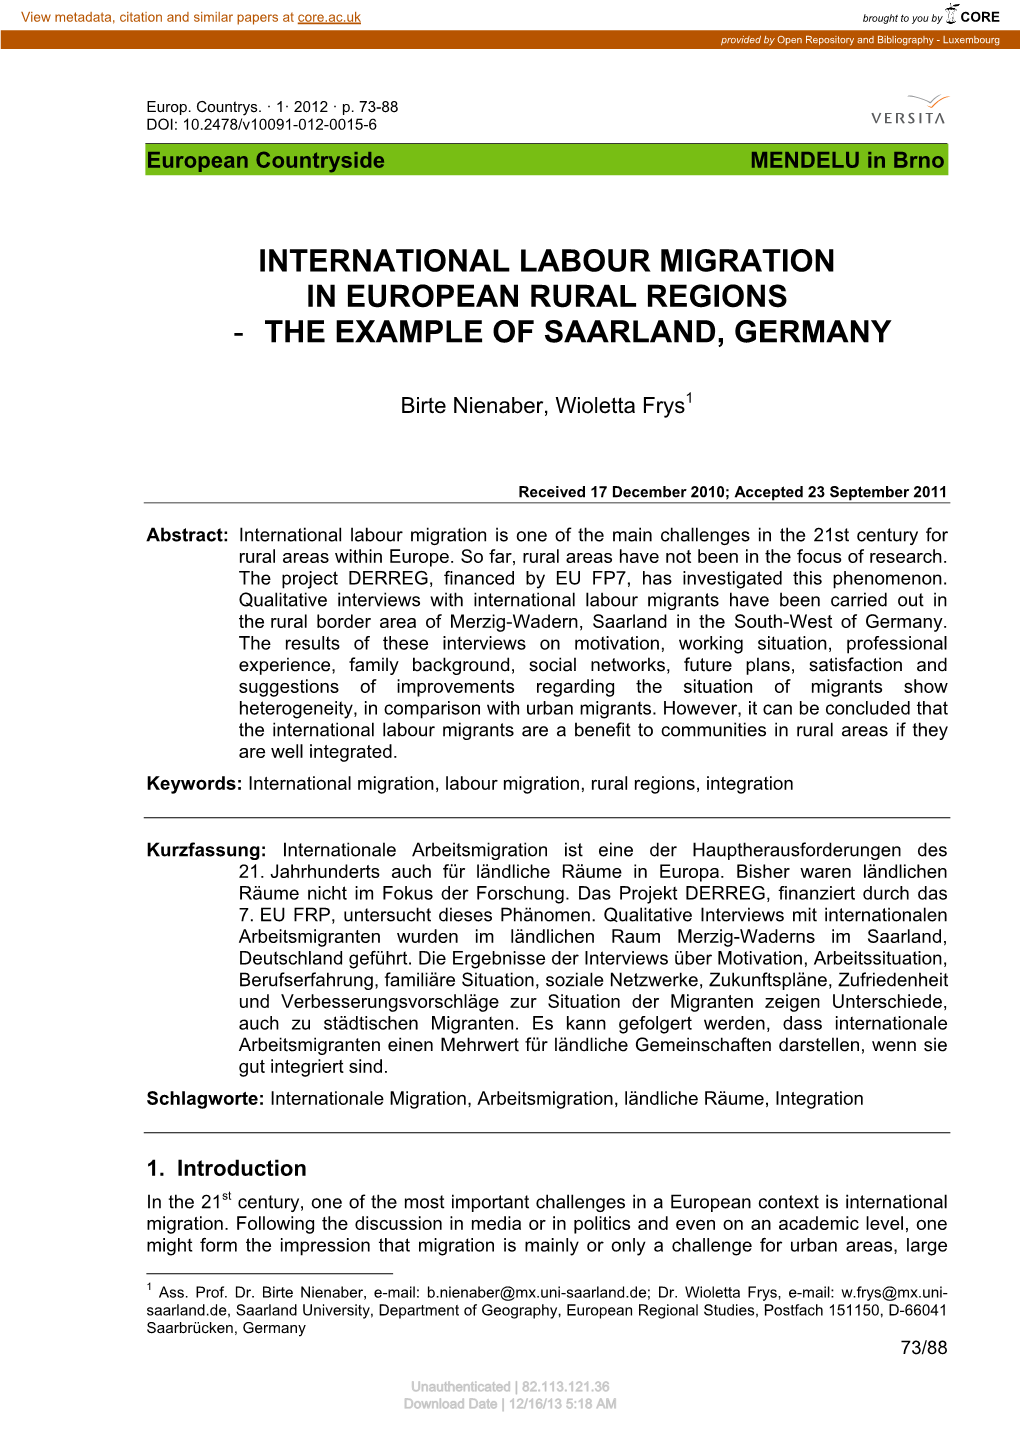 International Labour Migration in European Rural Regions - the Example of Saarland, Germany